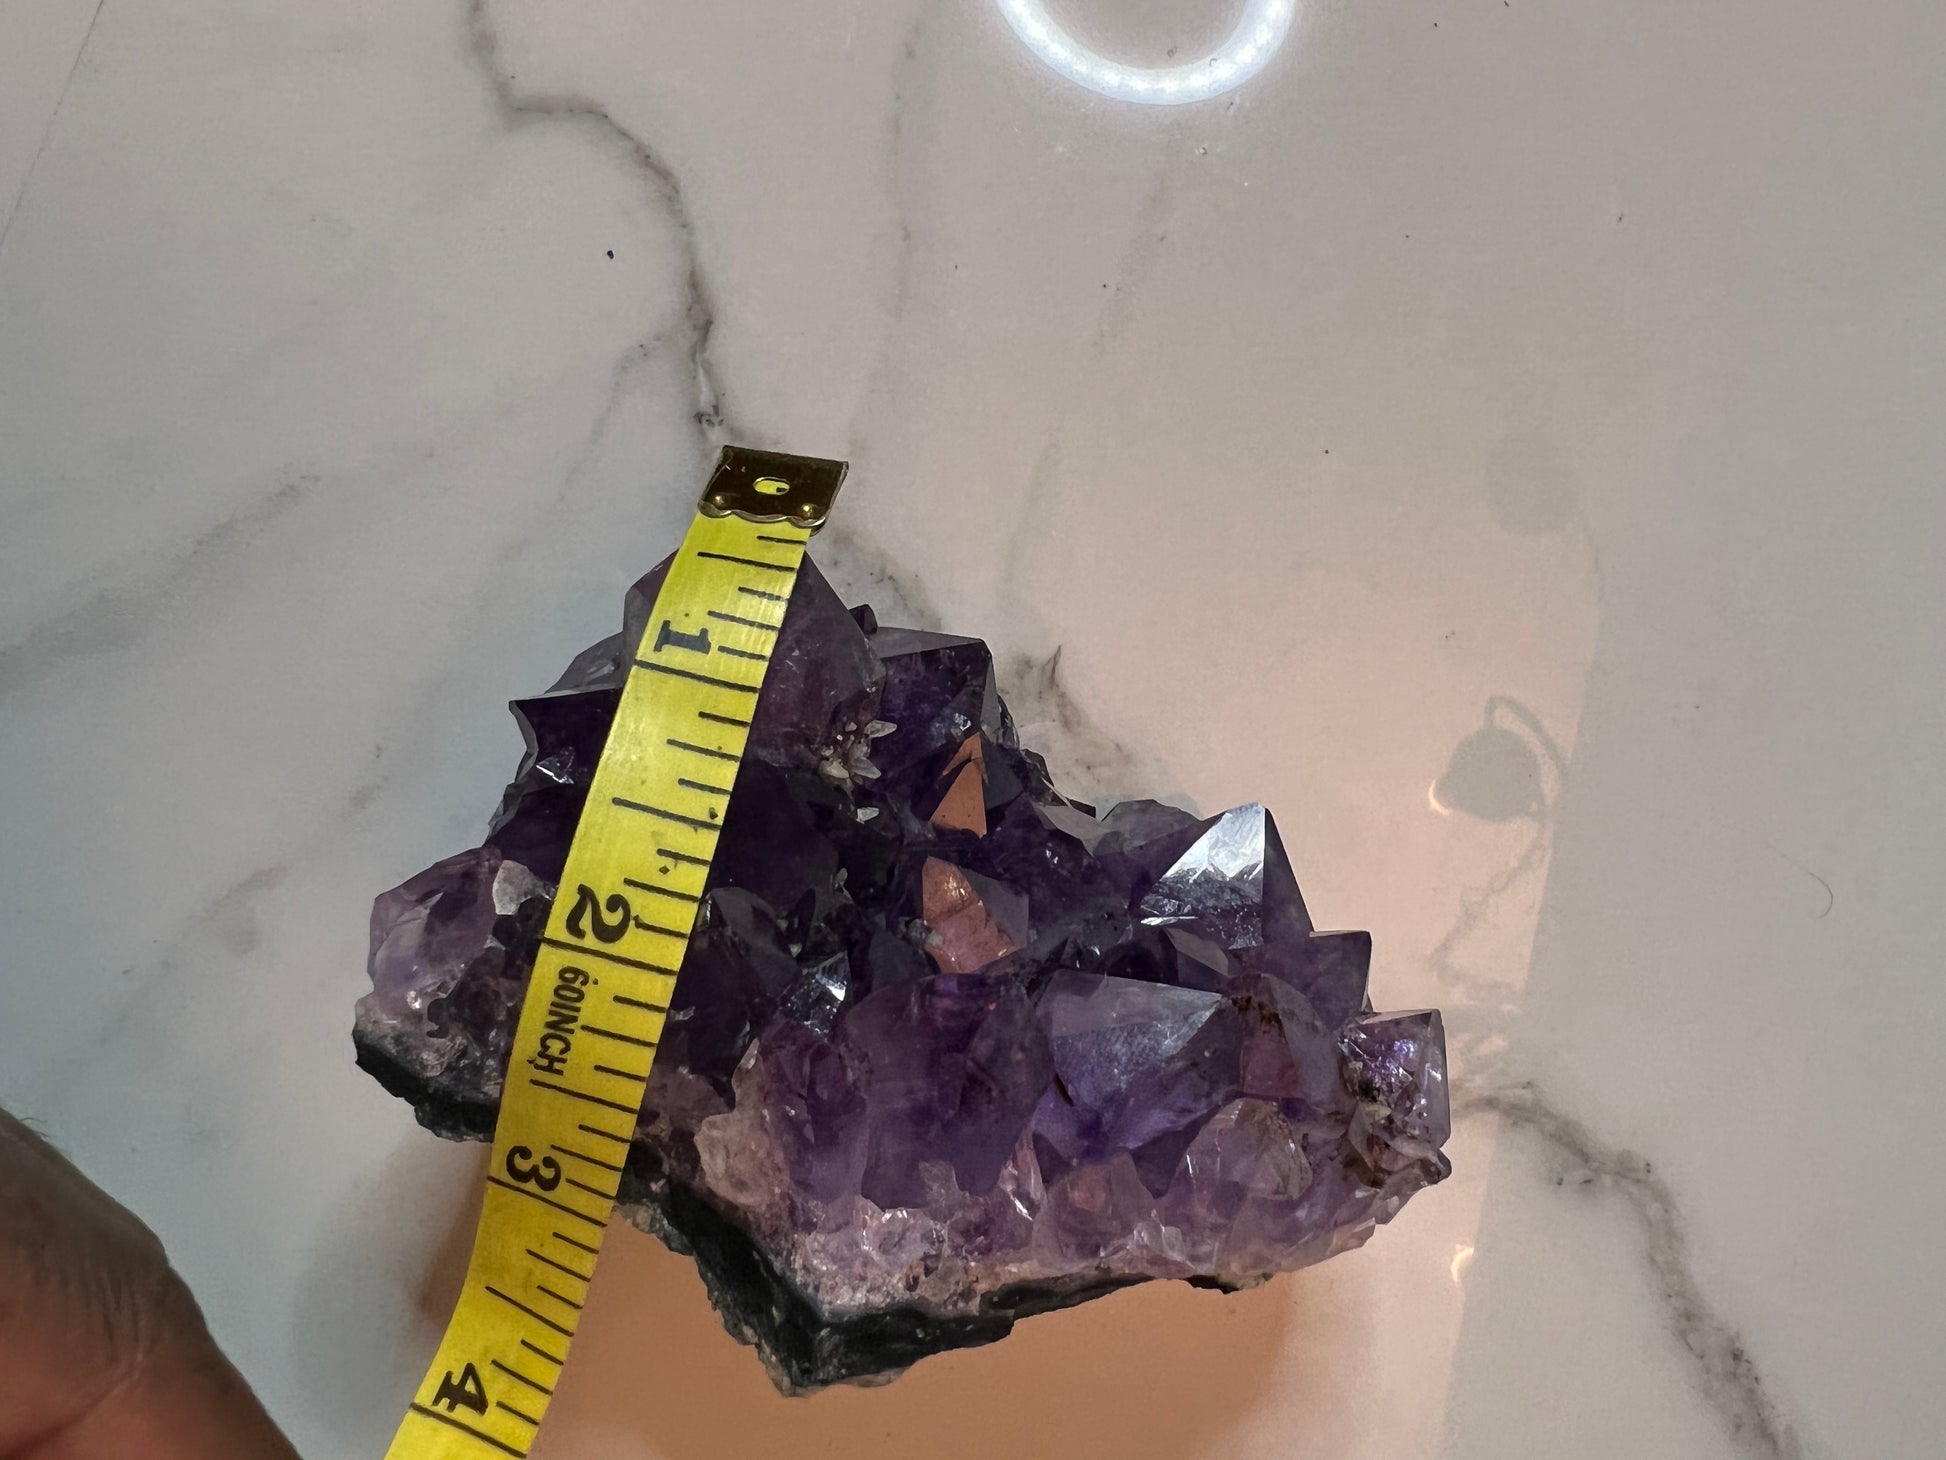 What Does Amethyst Do?, Amethyst Benefits